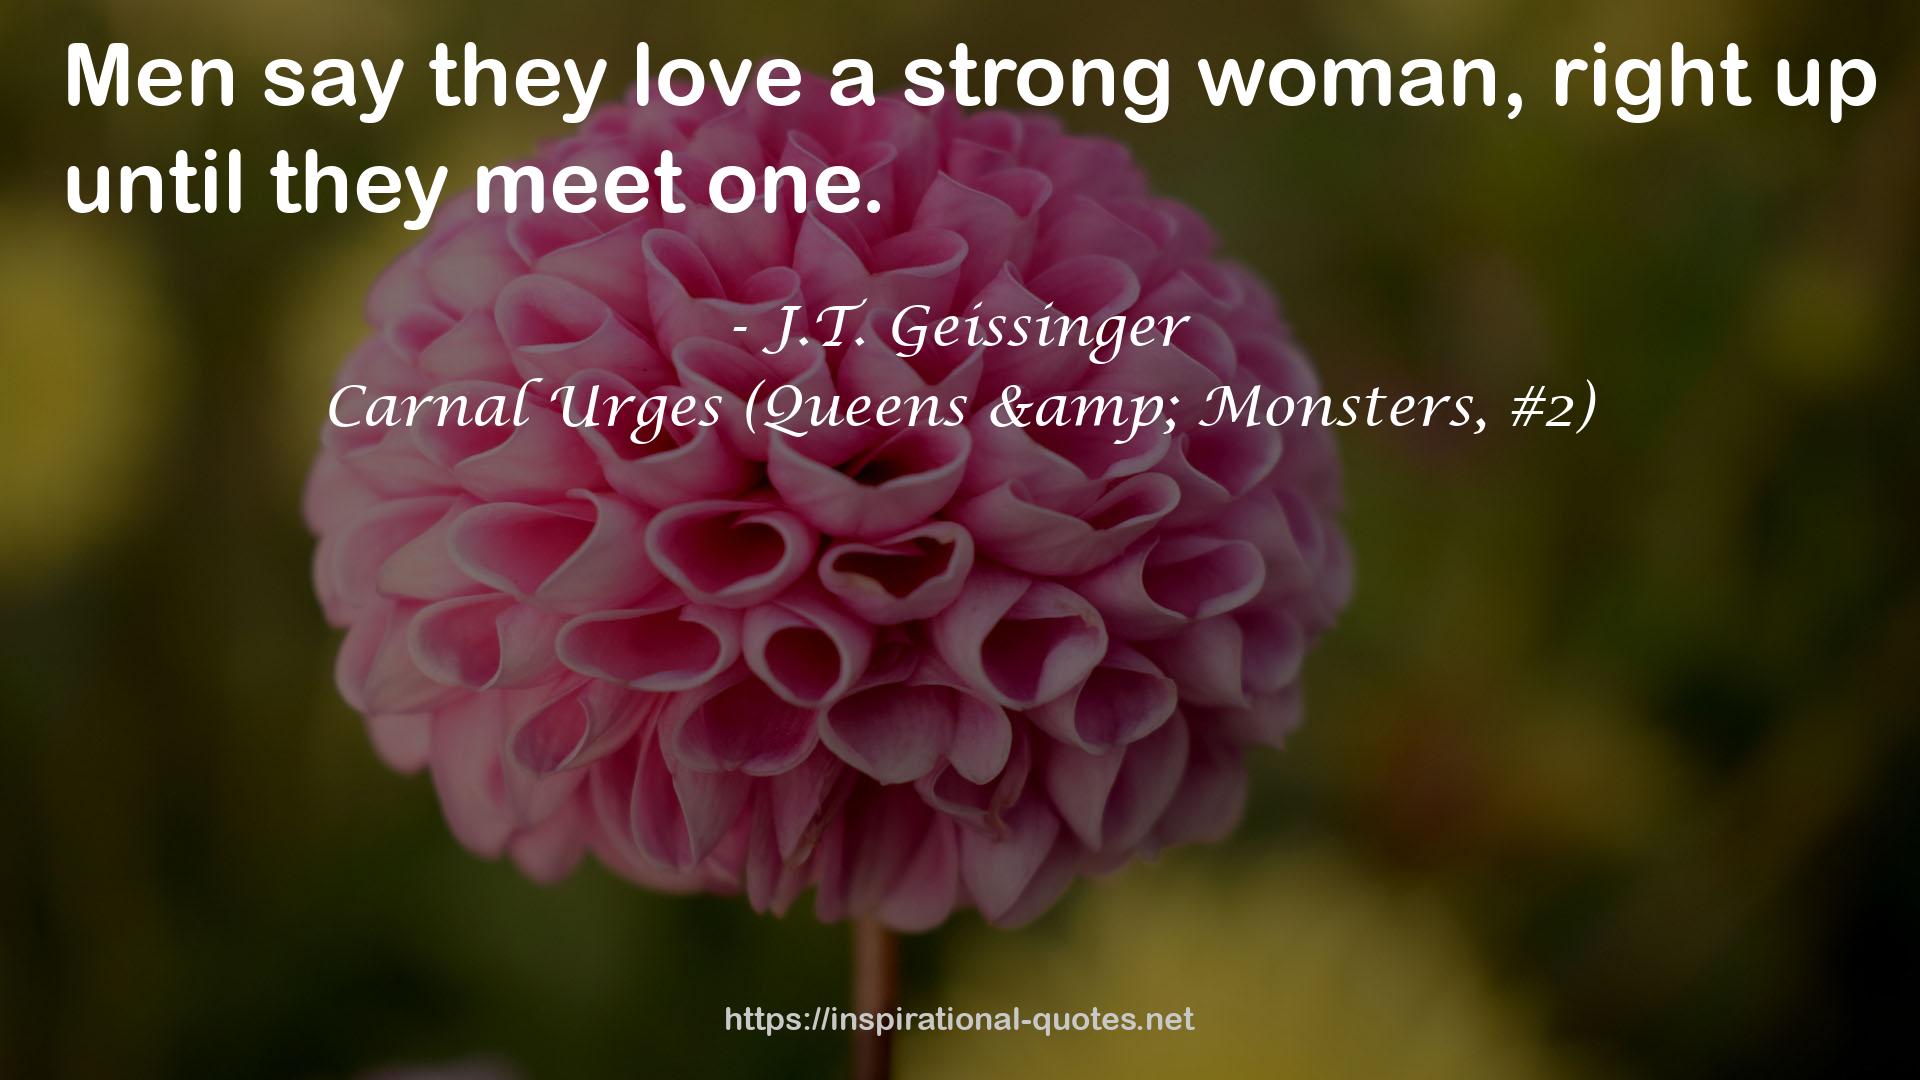 Carnal Urges (Queens & Monsters, #2) QUOTES